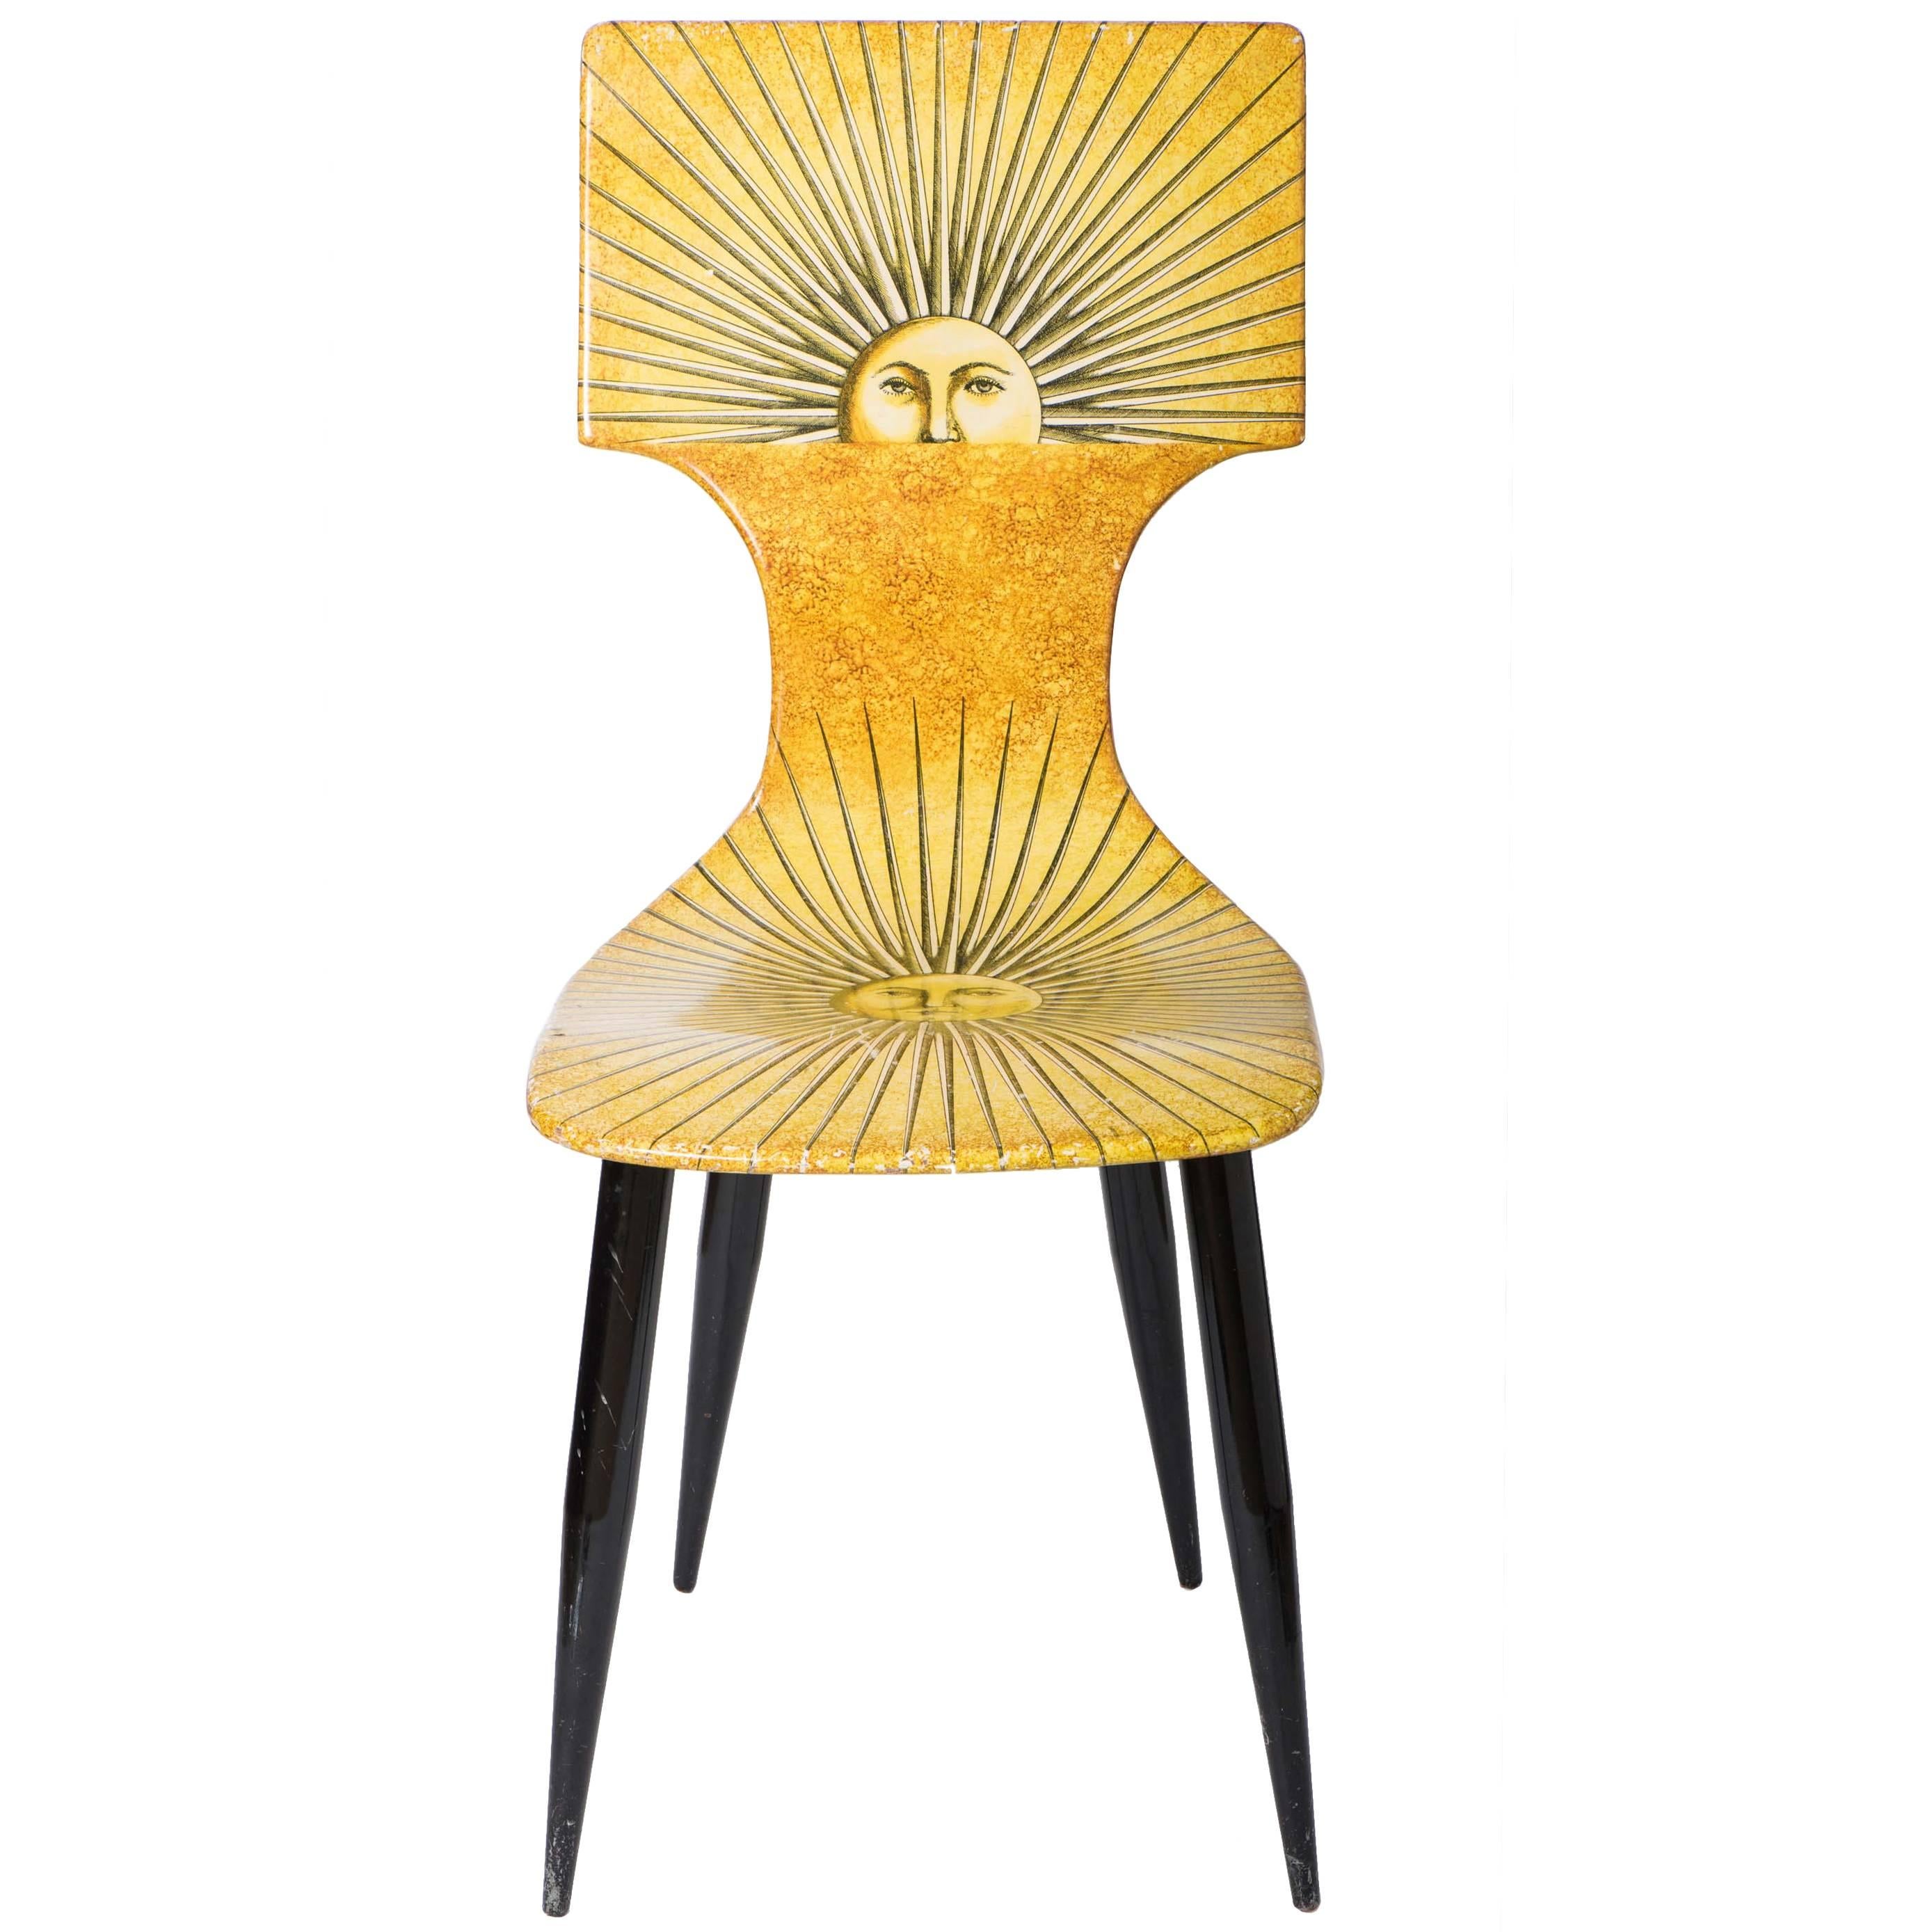 Piero Fornasetti lithographically printed chair "Sole", Italy circa 1950 For Sale